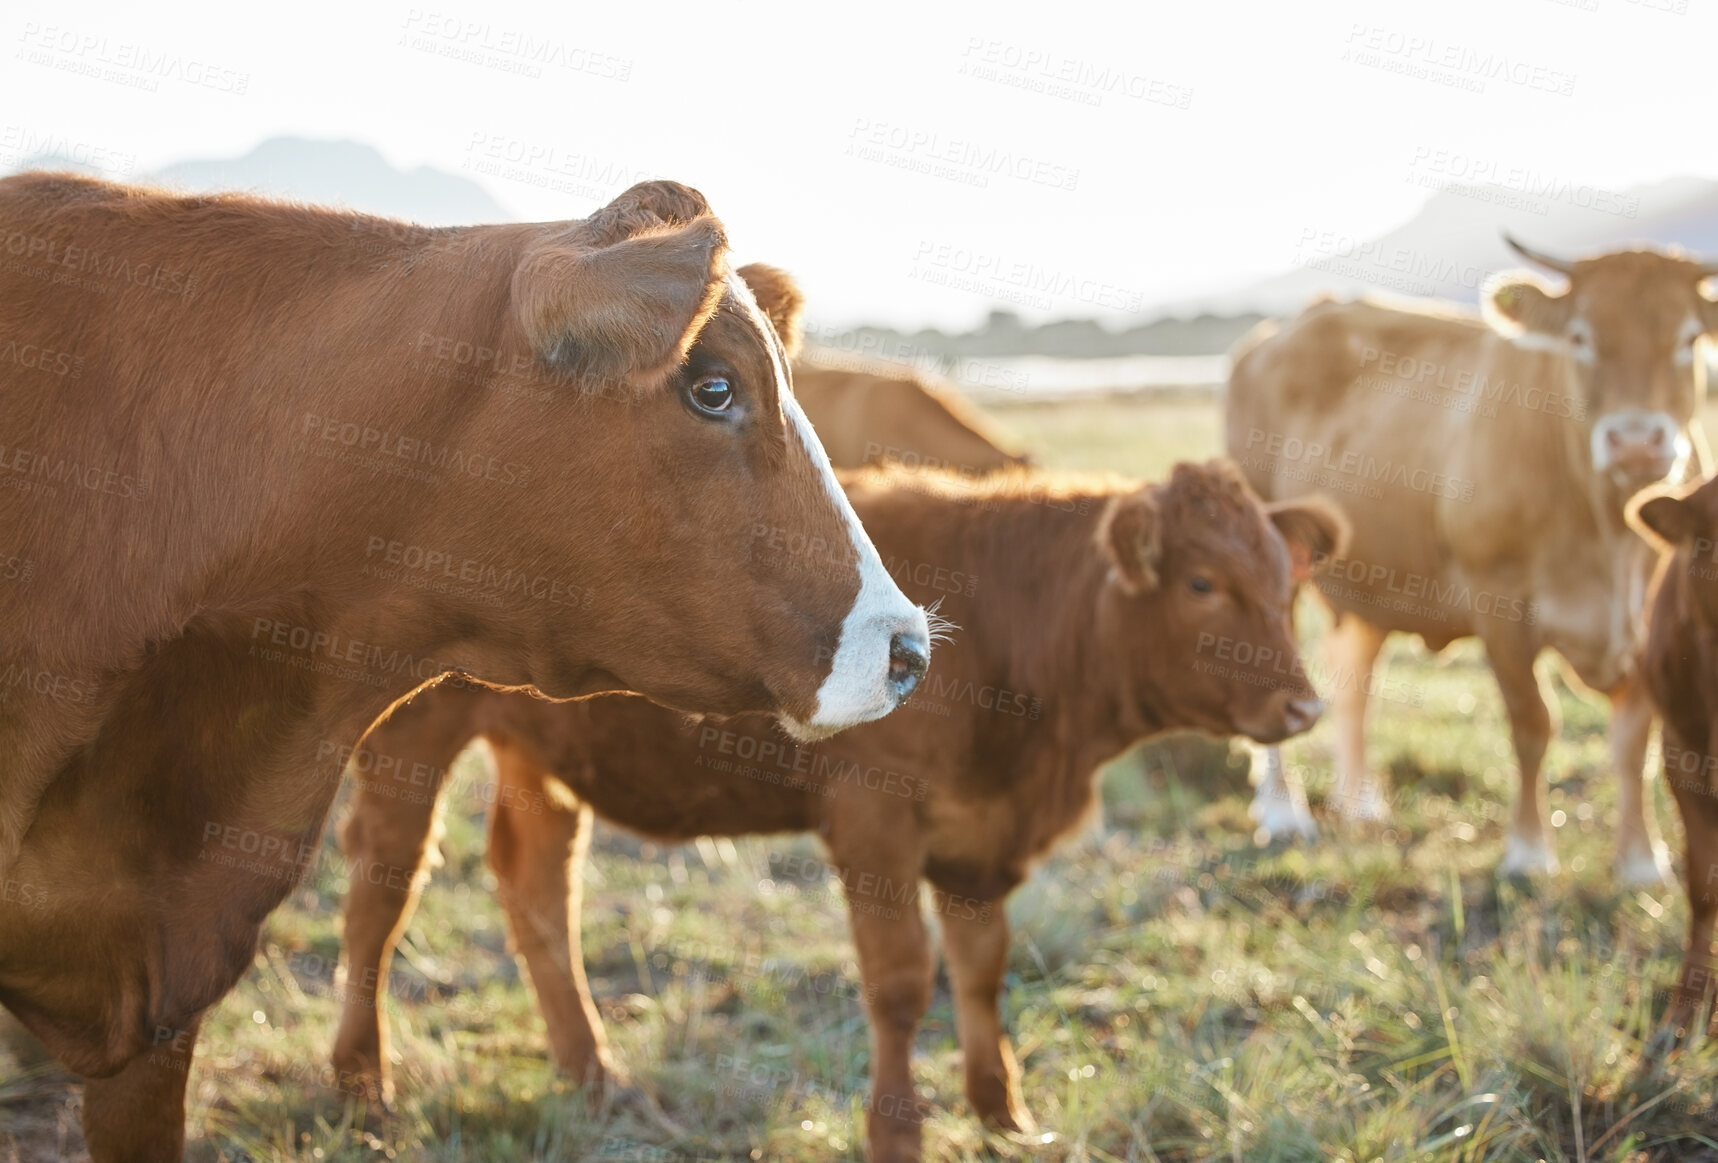 Buy stock photo Sustainable, agriculture and cows on a livestock farm in nature for dairy or beef production. Farming, environment and cattle animals on a agro field grazing on grass in the eco friendly countryside.